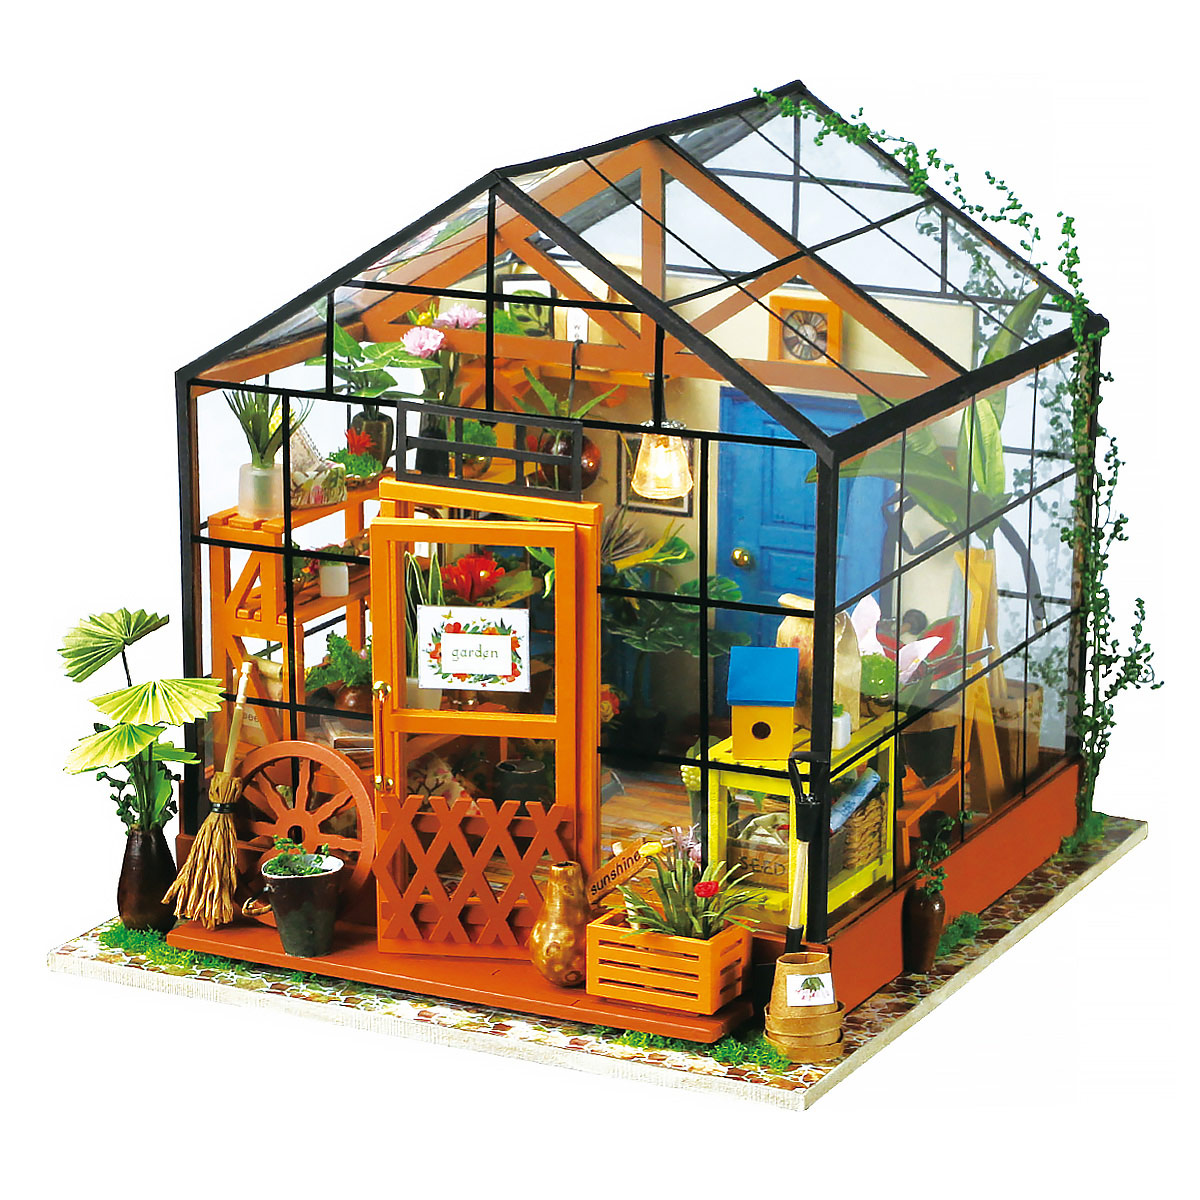 Rolife Love Post Office DIY Wall Hanging Miniature House Kit DS021